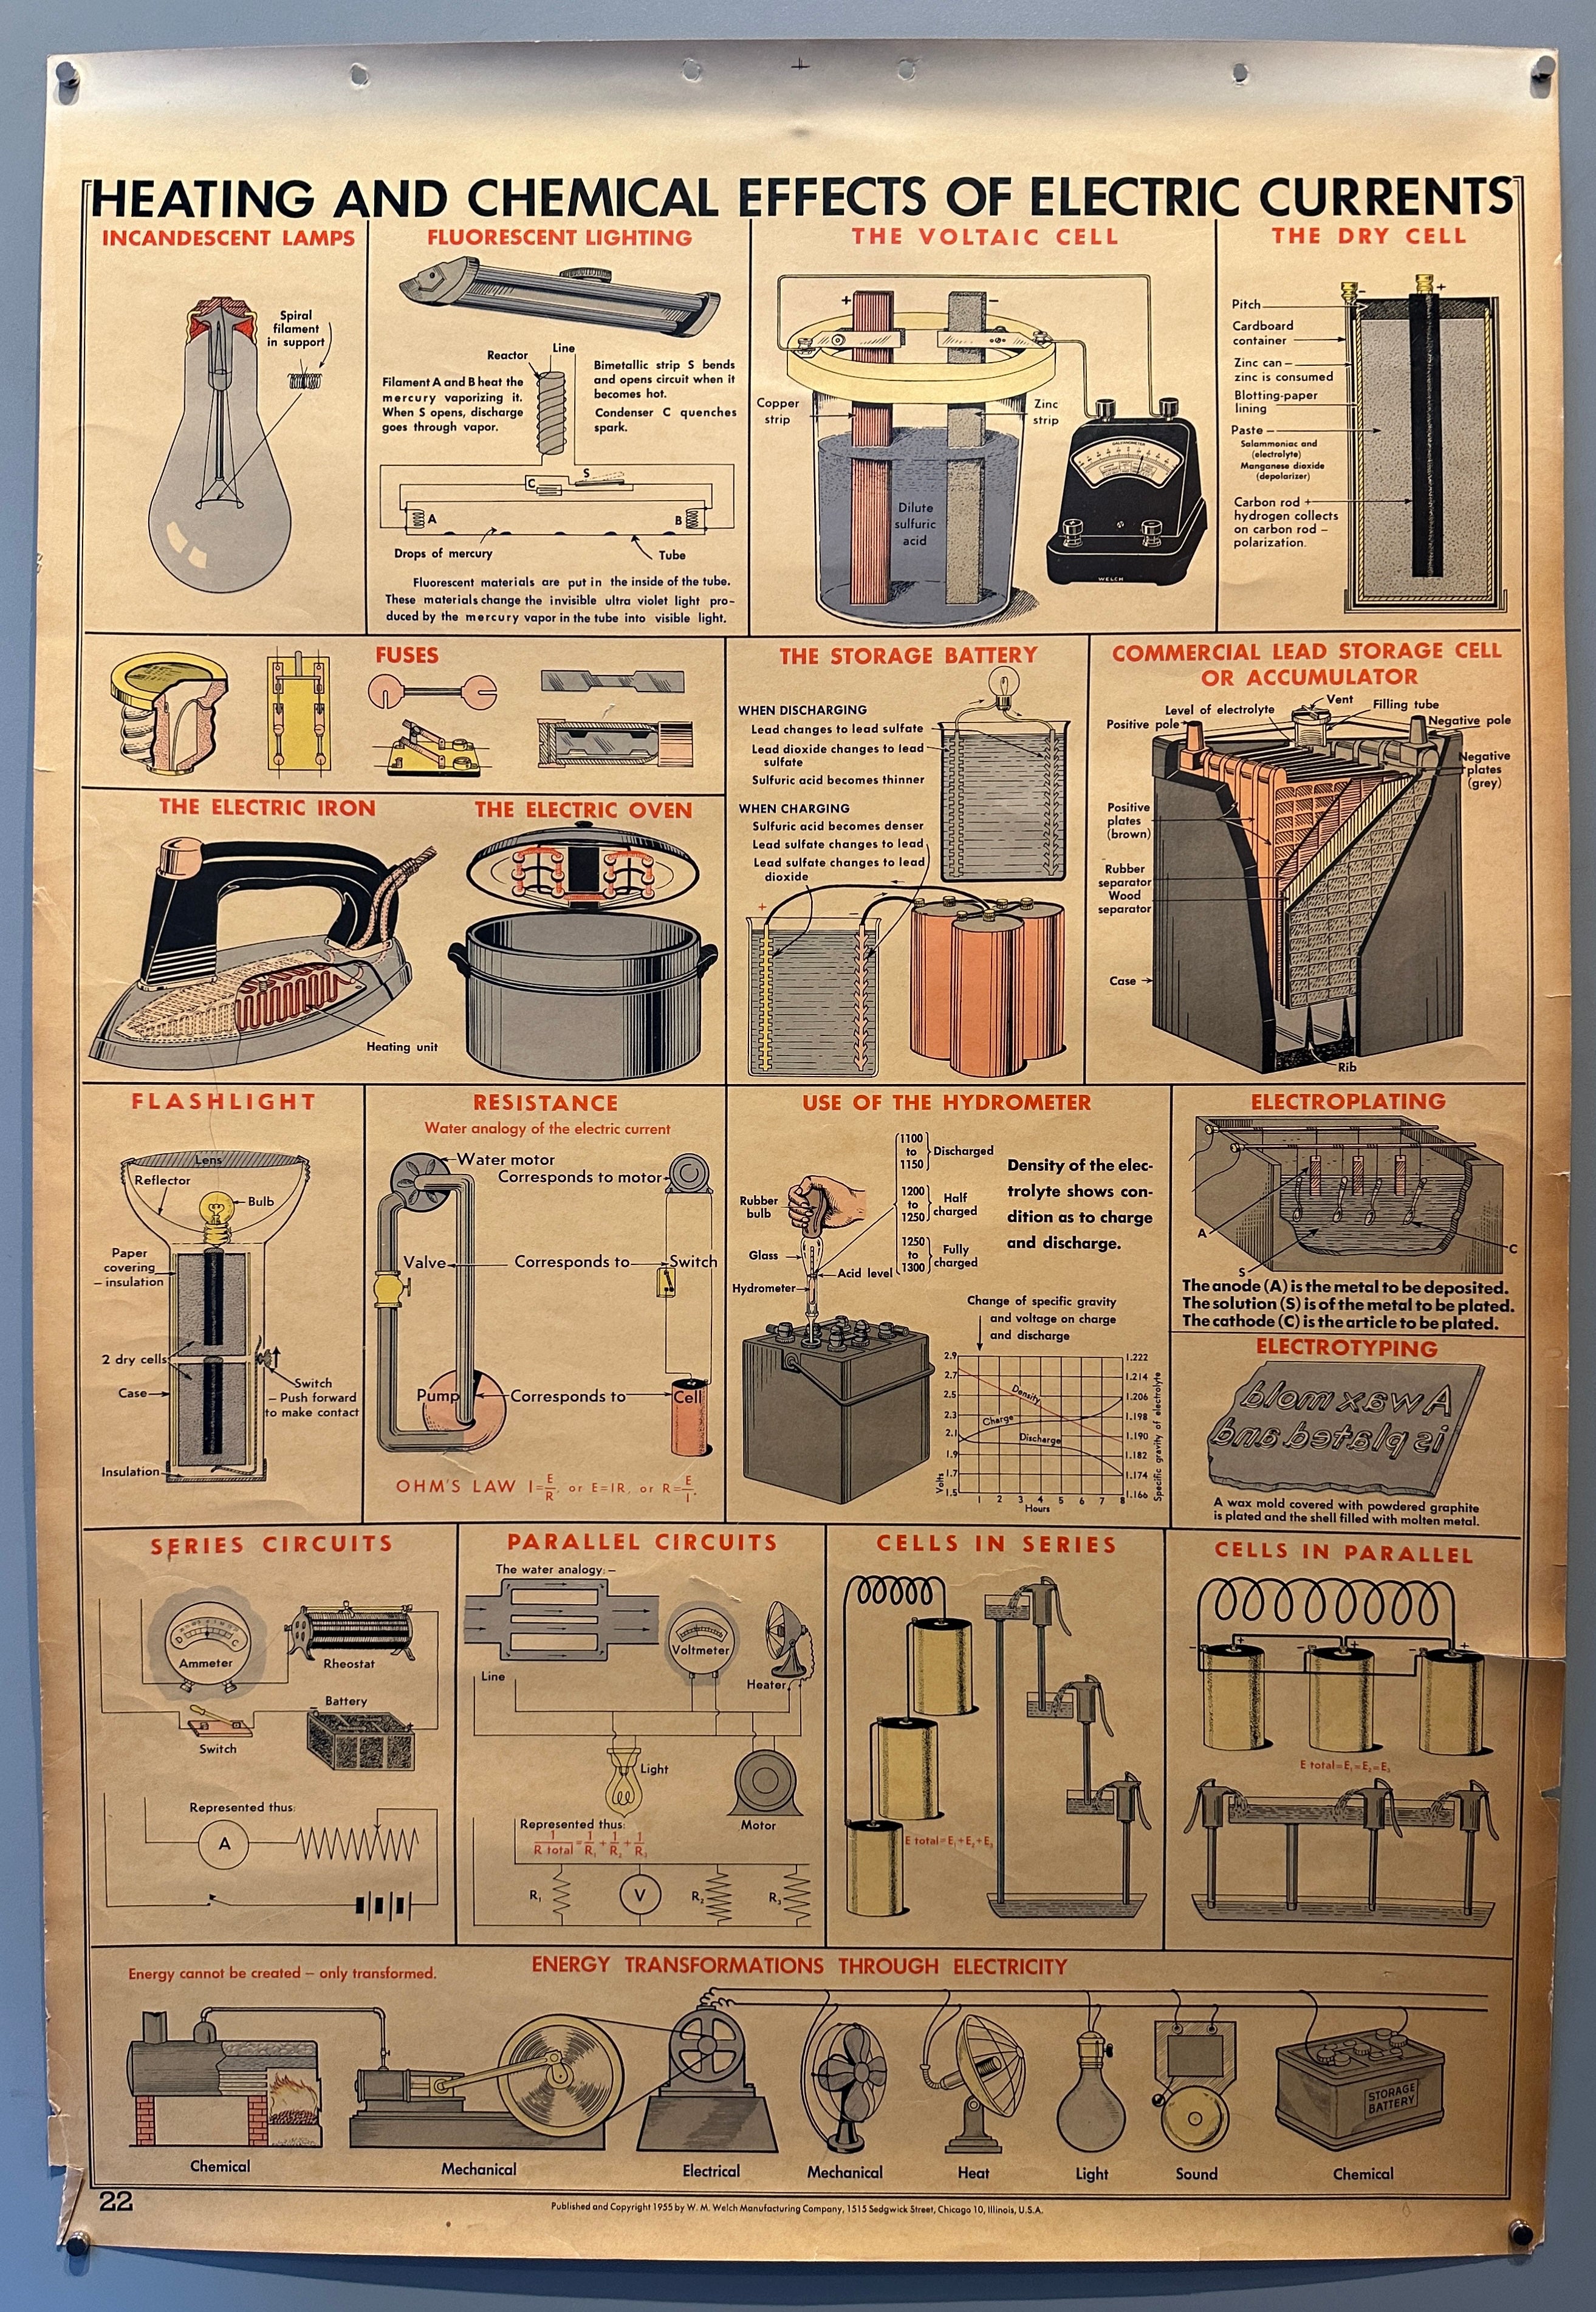 Heating and Chemical Effects of Electric Currents Wall Chart